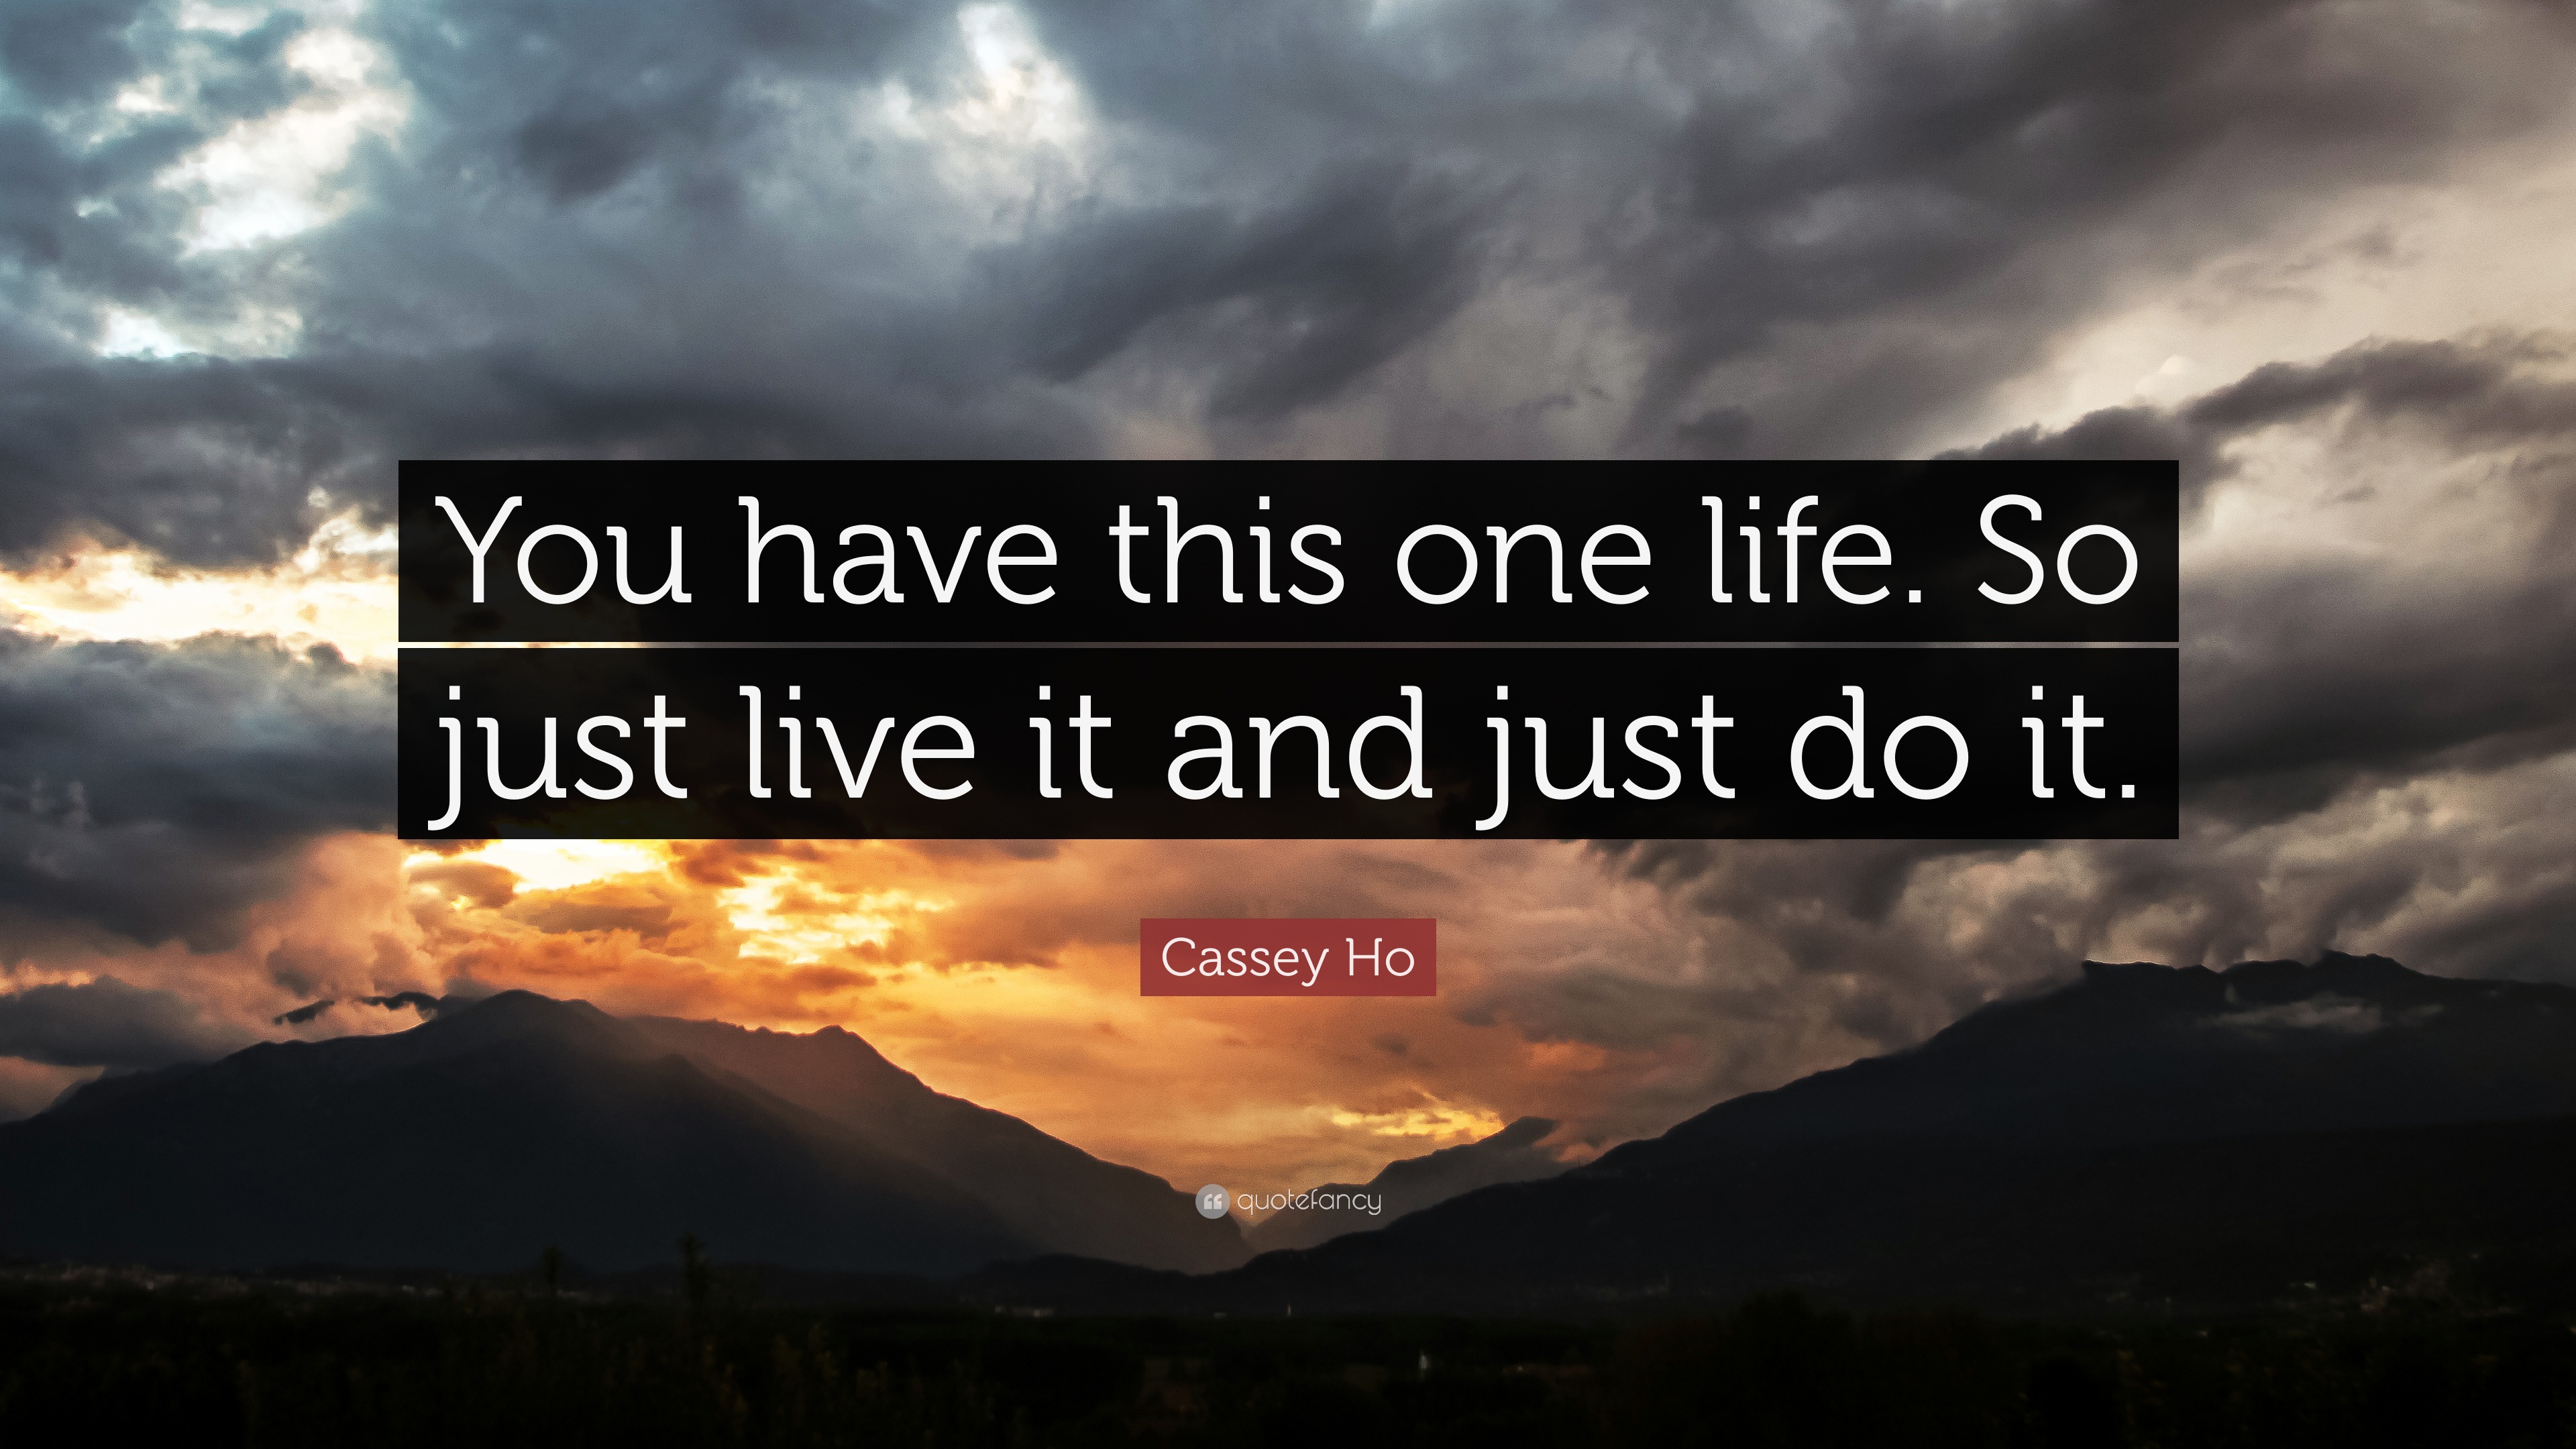 Cassey Ho Quote “You have this one life So just live it and